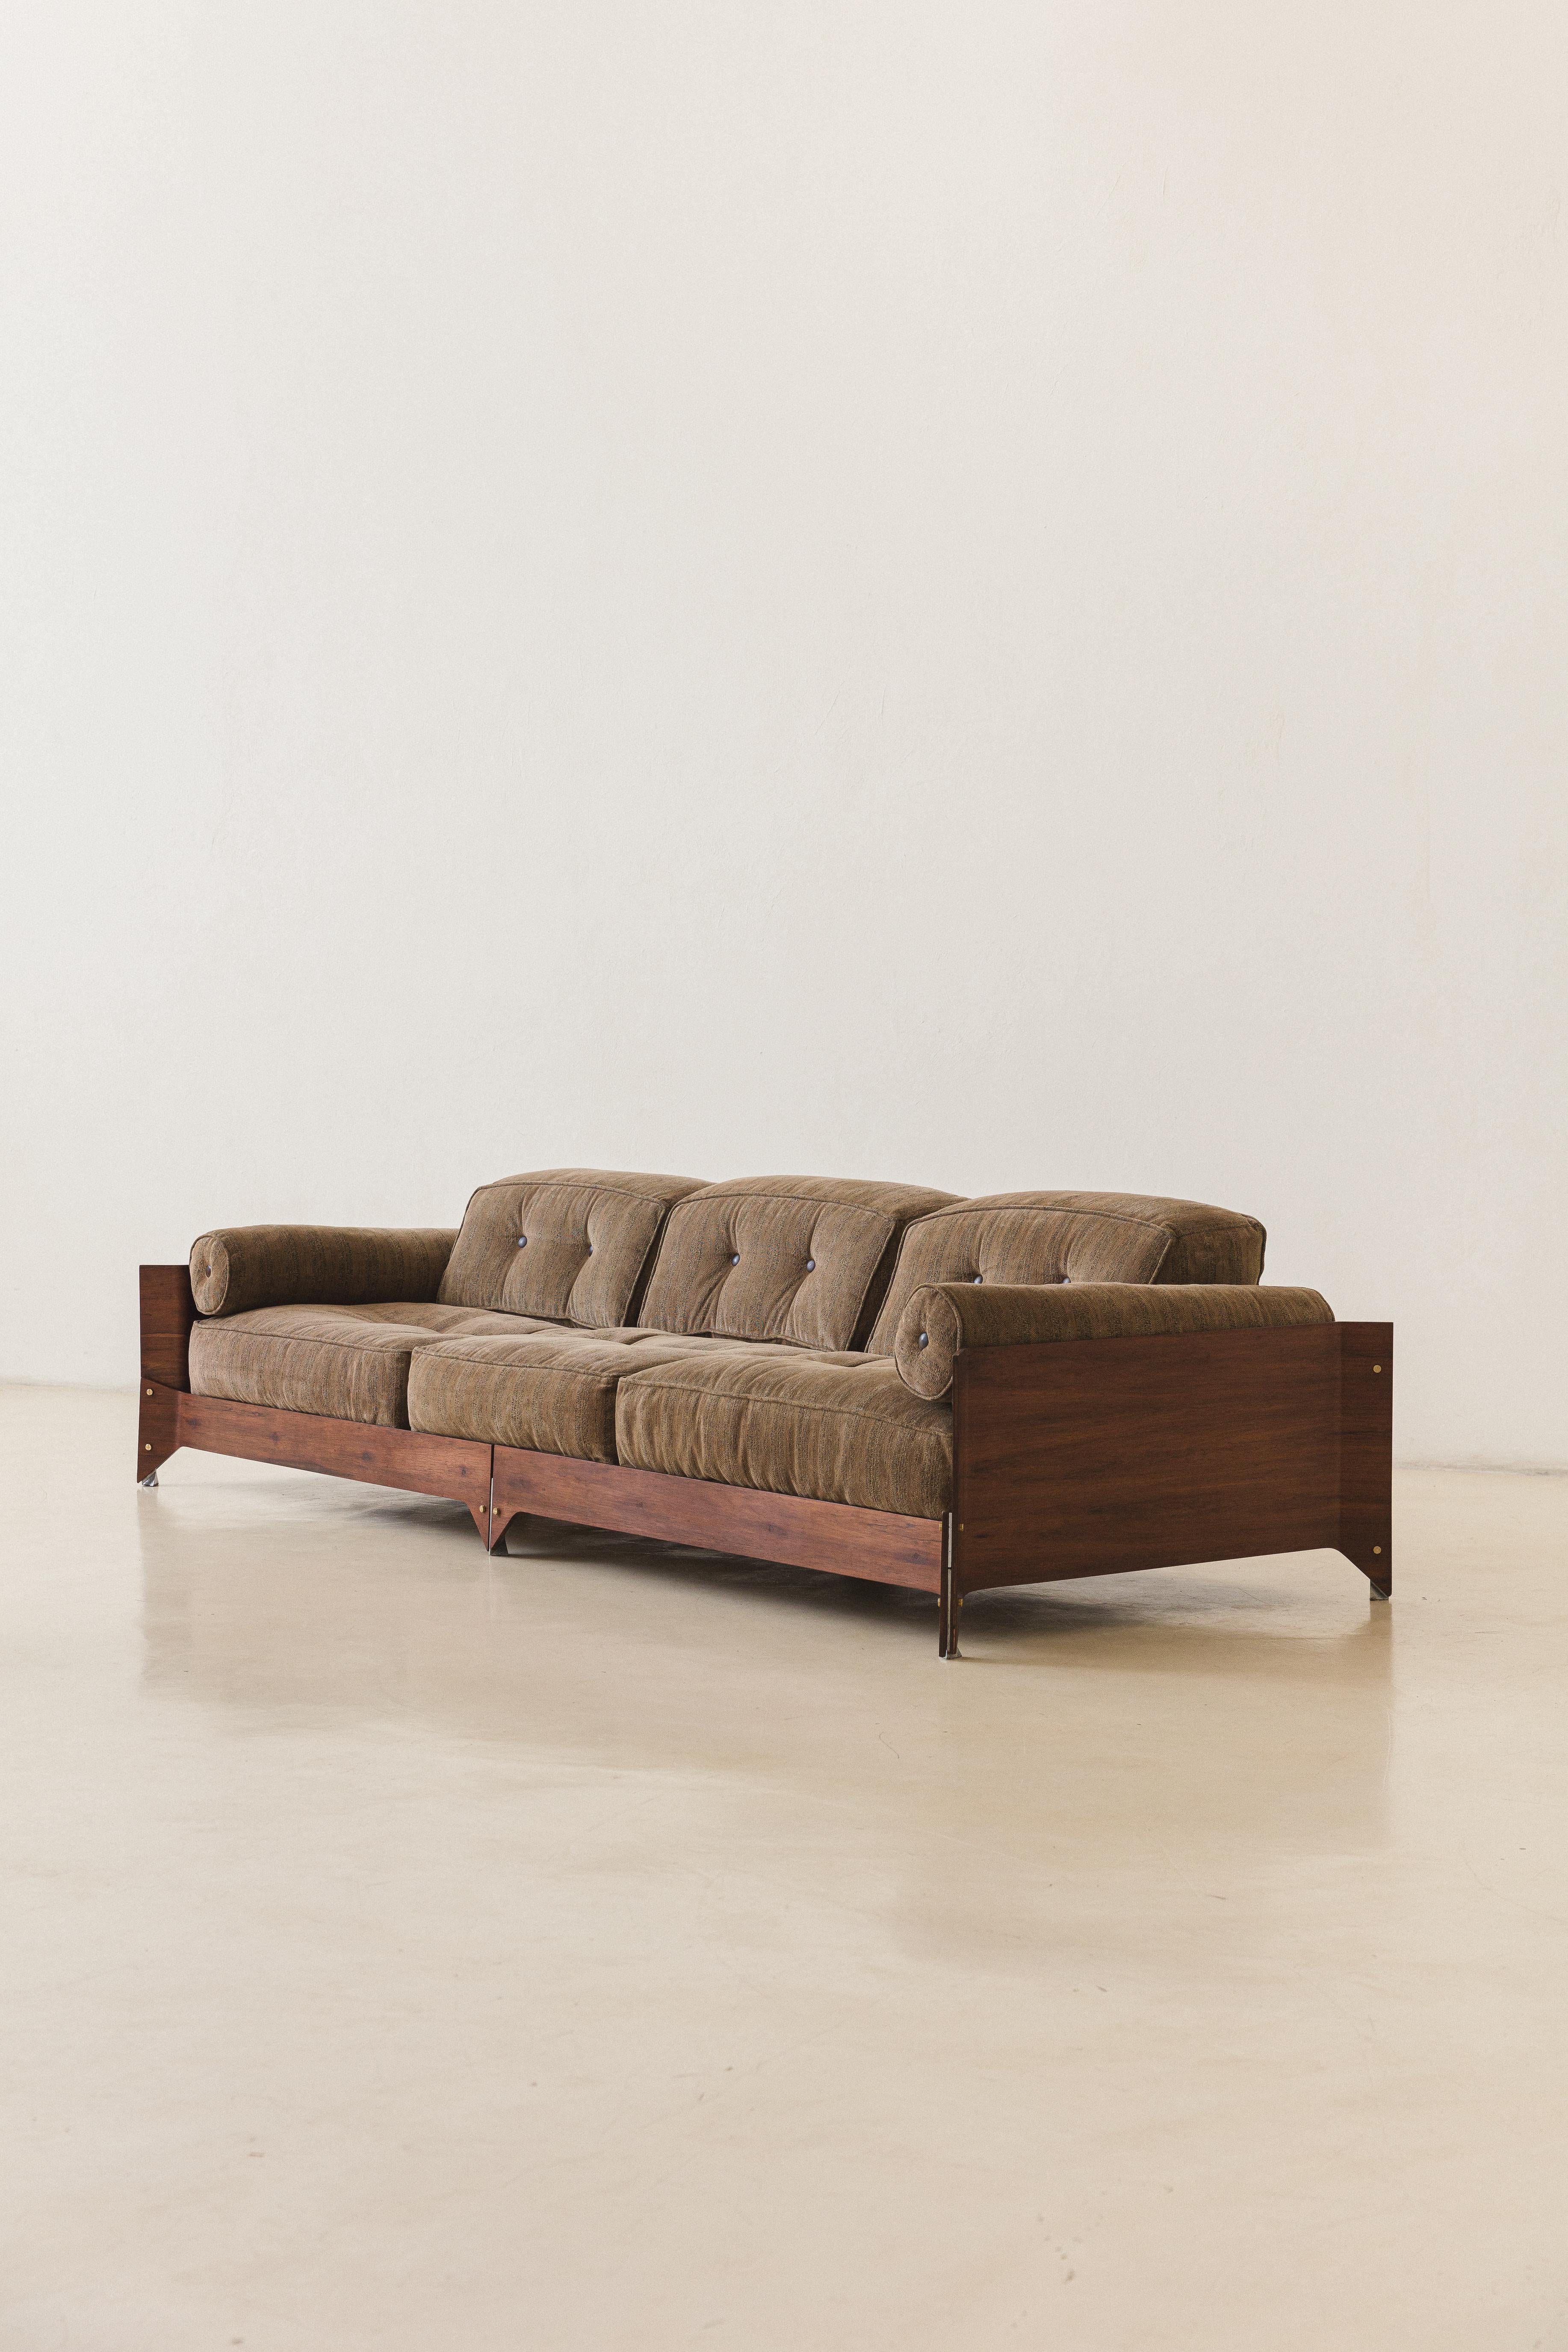 Mid-Century Modern Iconic Brasiliana Sofa Design by Jorge Zalszupin, Rosewood and Brass, 1960s For Sale